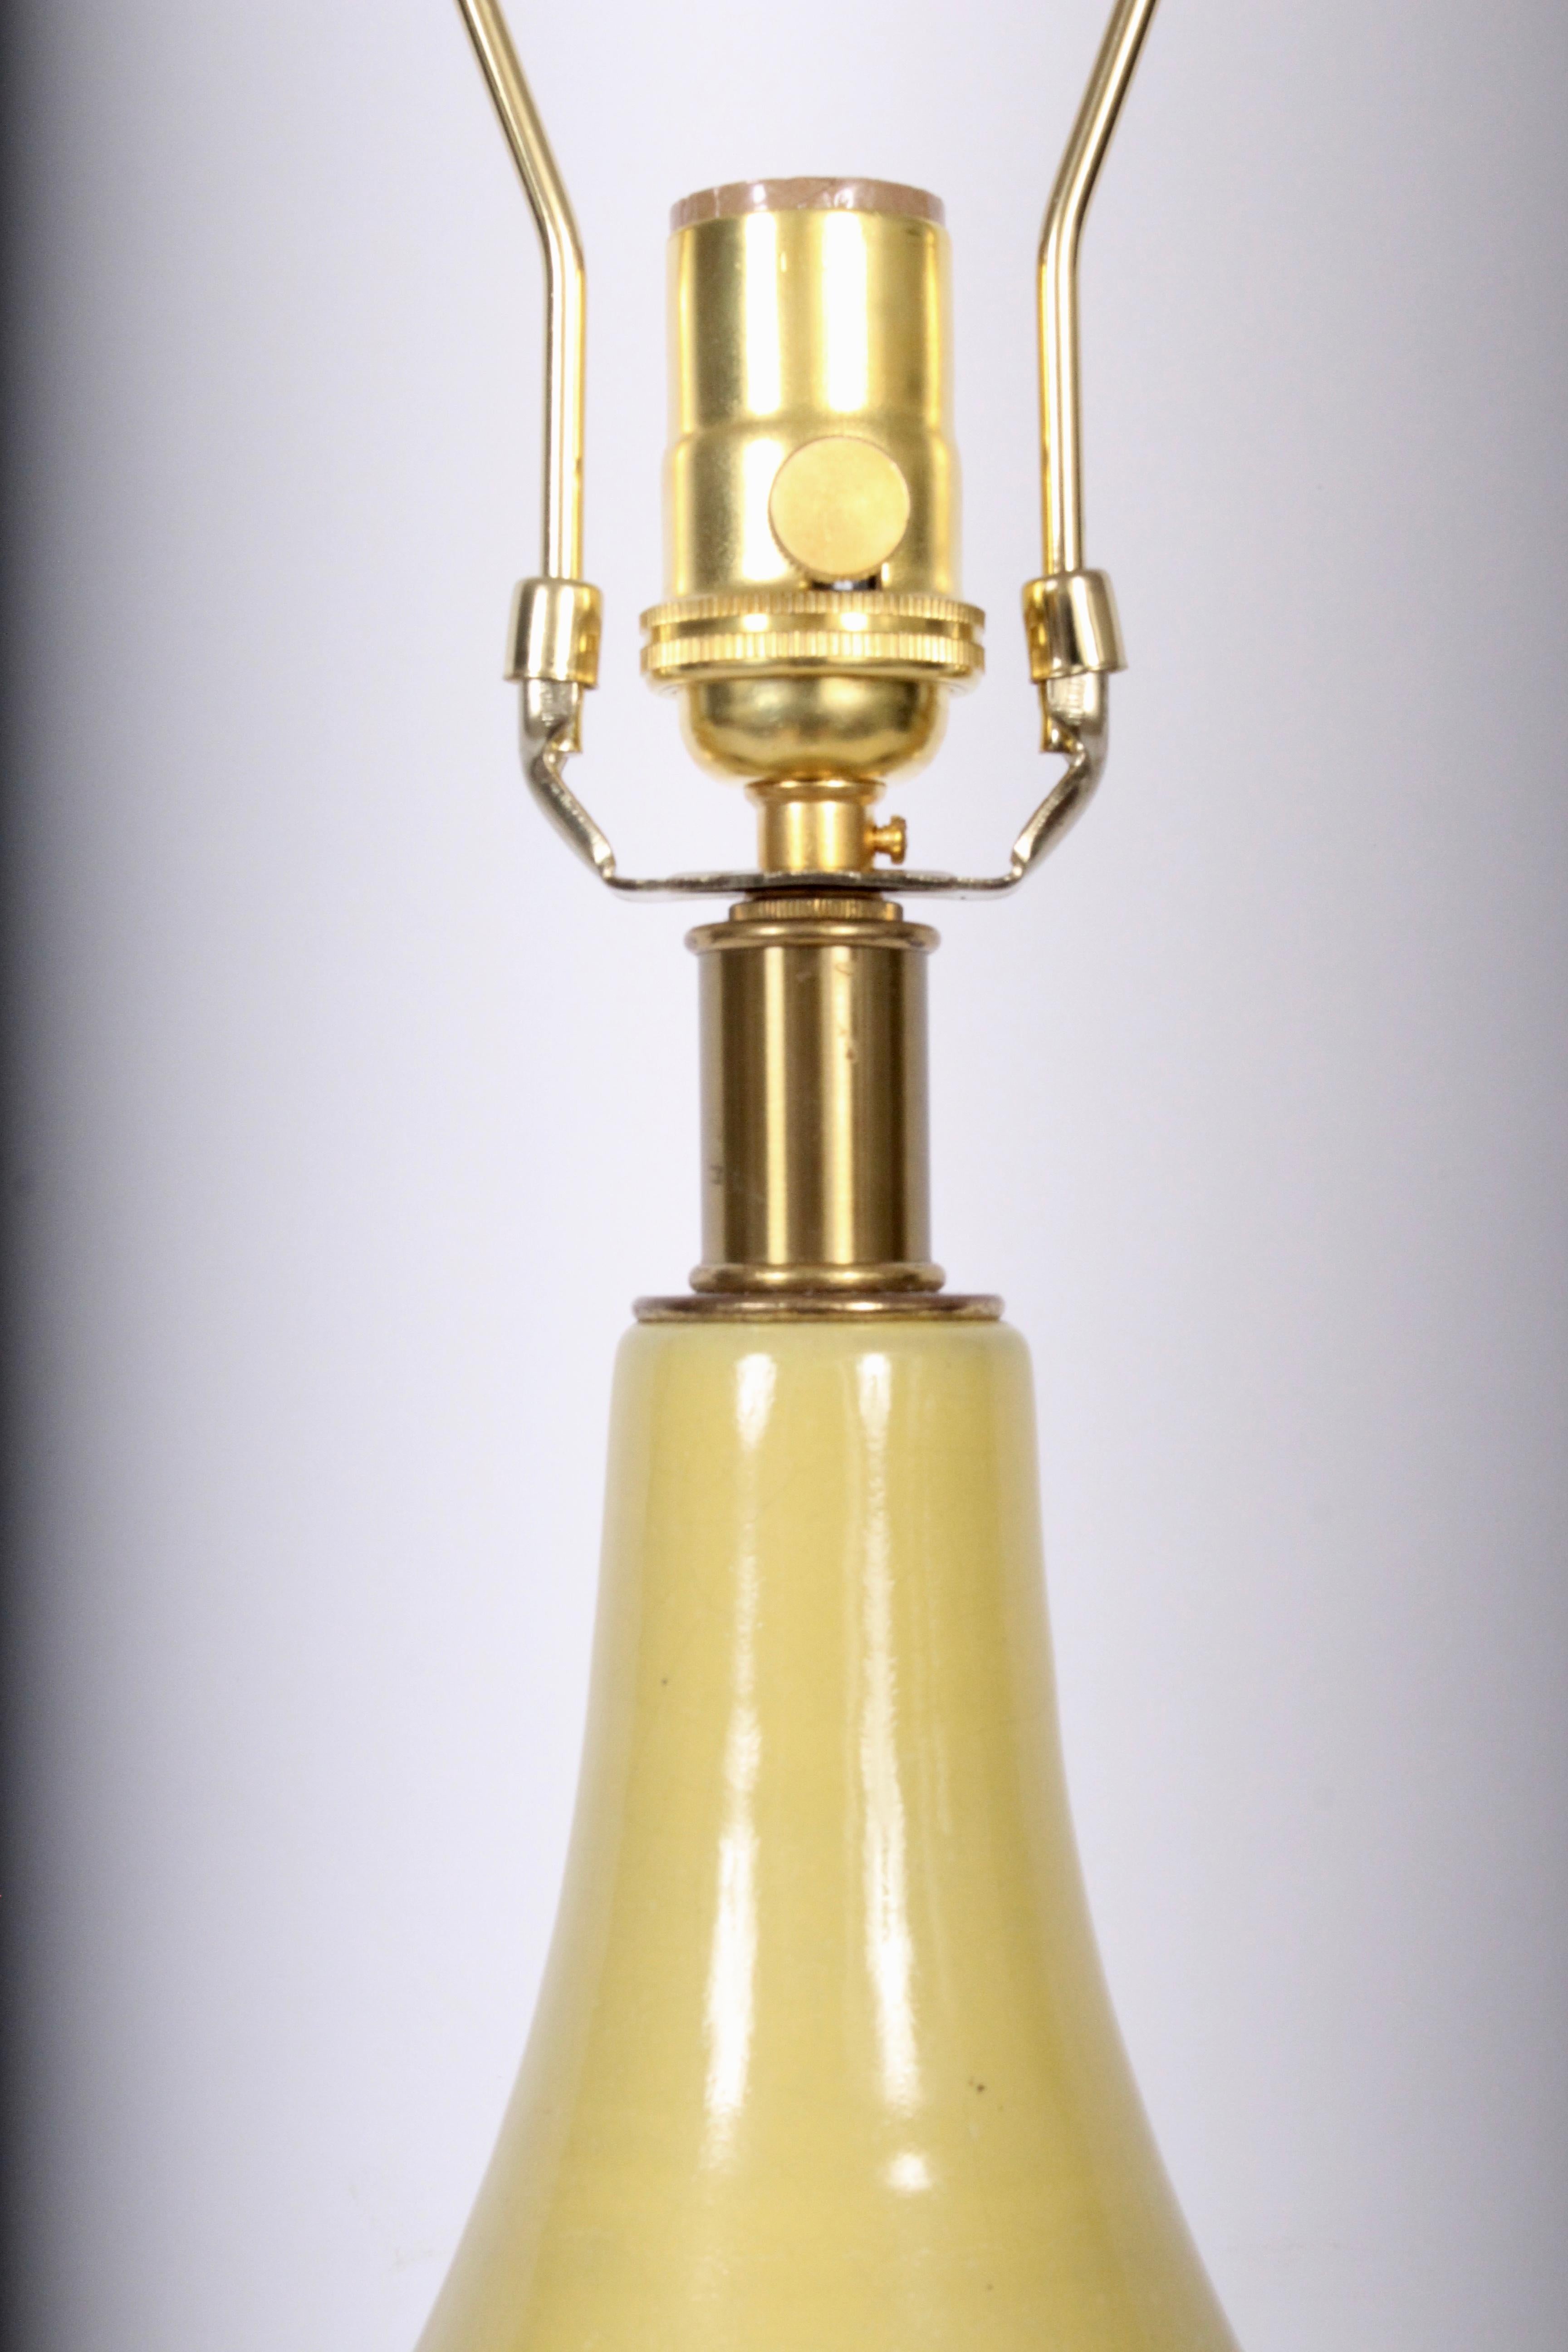 Monumental Design-Technics Bright Yellow Banded Art Pottery Table Lamp In Good Condition For Sale In Bainbridge, NY